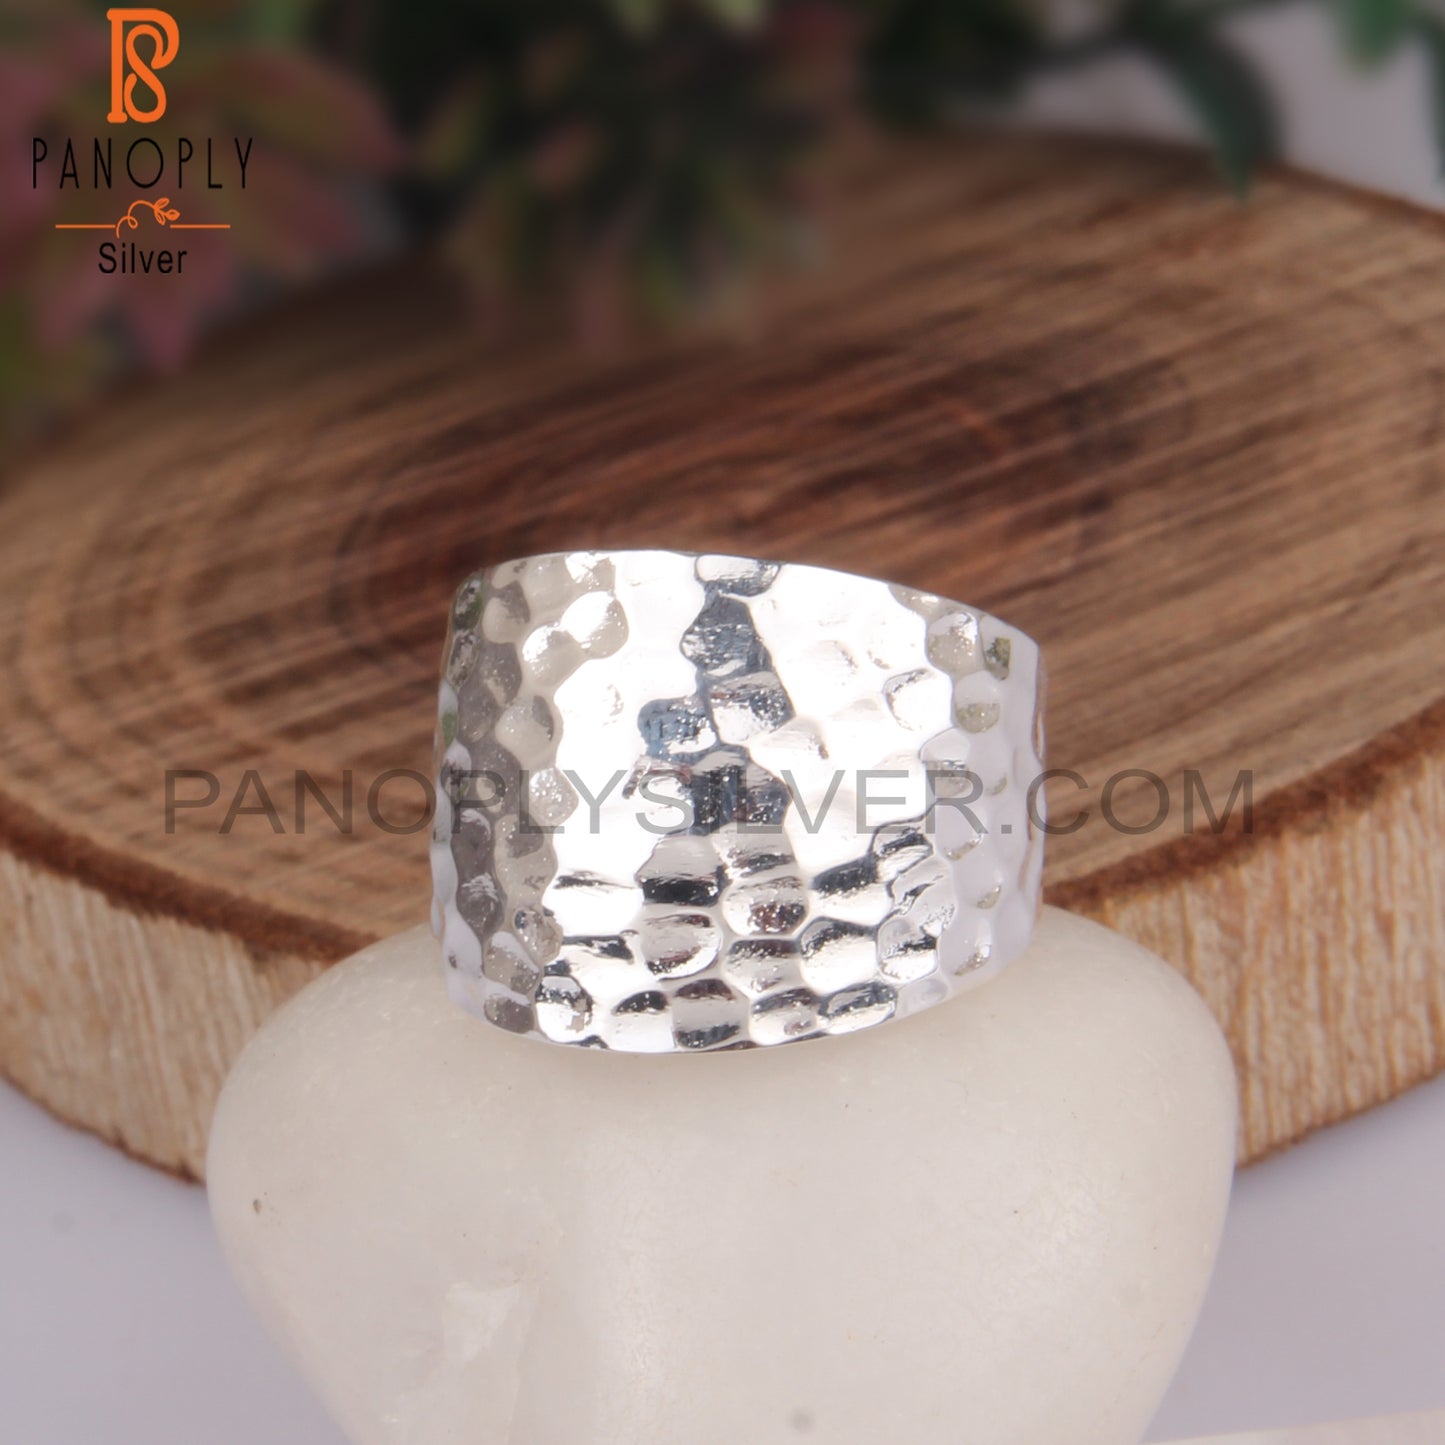 Handhammered Bold 925 Sterling Silver Ring